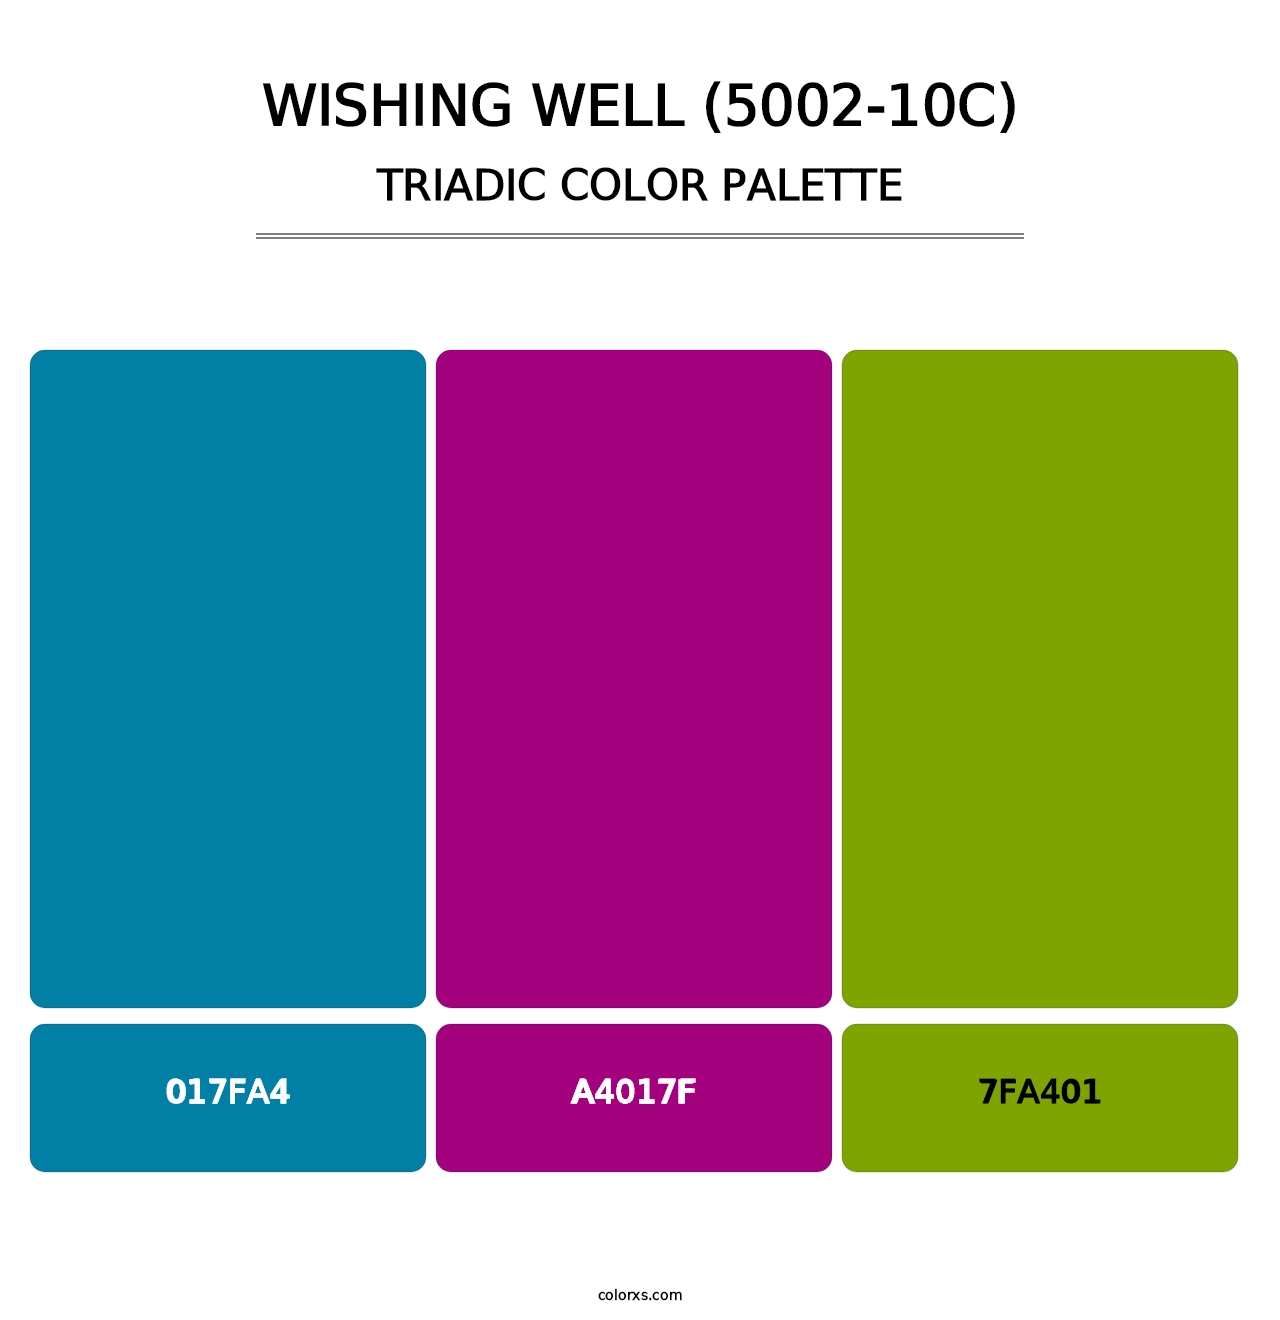 Wishing Well (5002-10C) - Triadic Color Palette